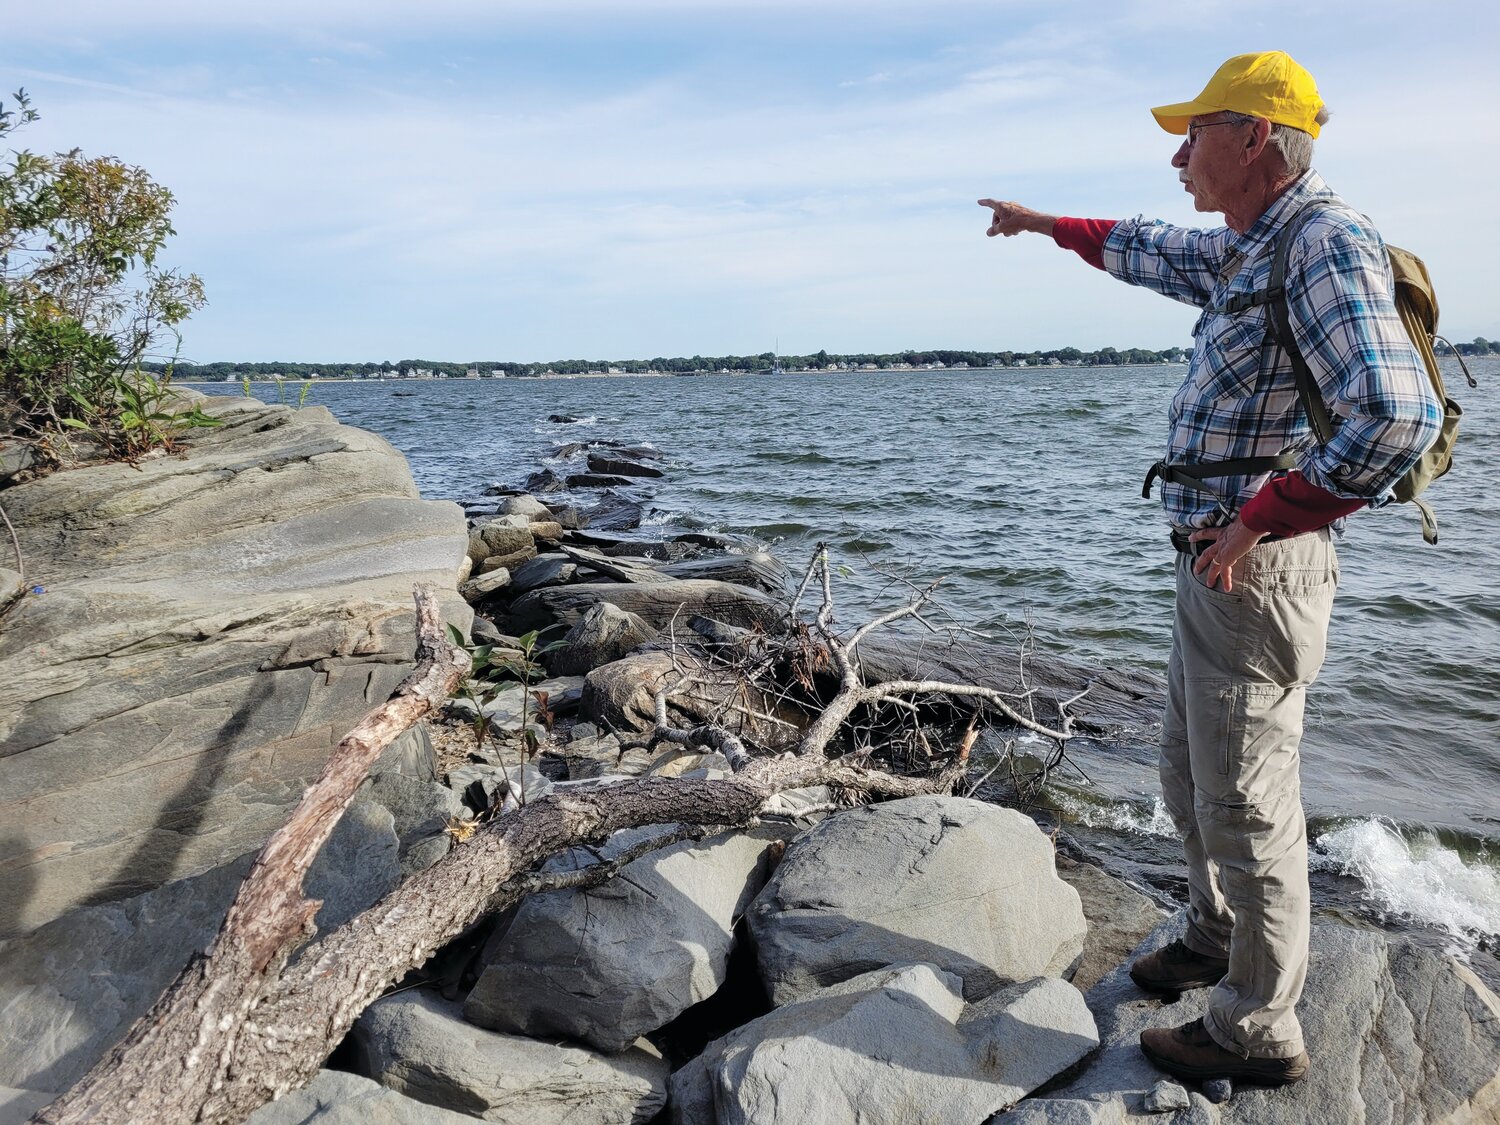 RI’S FIRST LOST AVIATOR: John Kostrzewa points across the row of Sally Rocks, which stretch from the Goddard Memorial State Park beach in Warwick and into Greenwich Bay. The author discovered a WWI seaplane manufacturer set up operations a century ago on Chepiwanoxet Point, and he eventually learned and wrote about a  test pilot who lost his life on these same choppy waters.